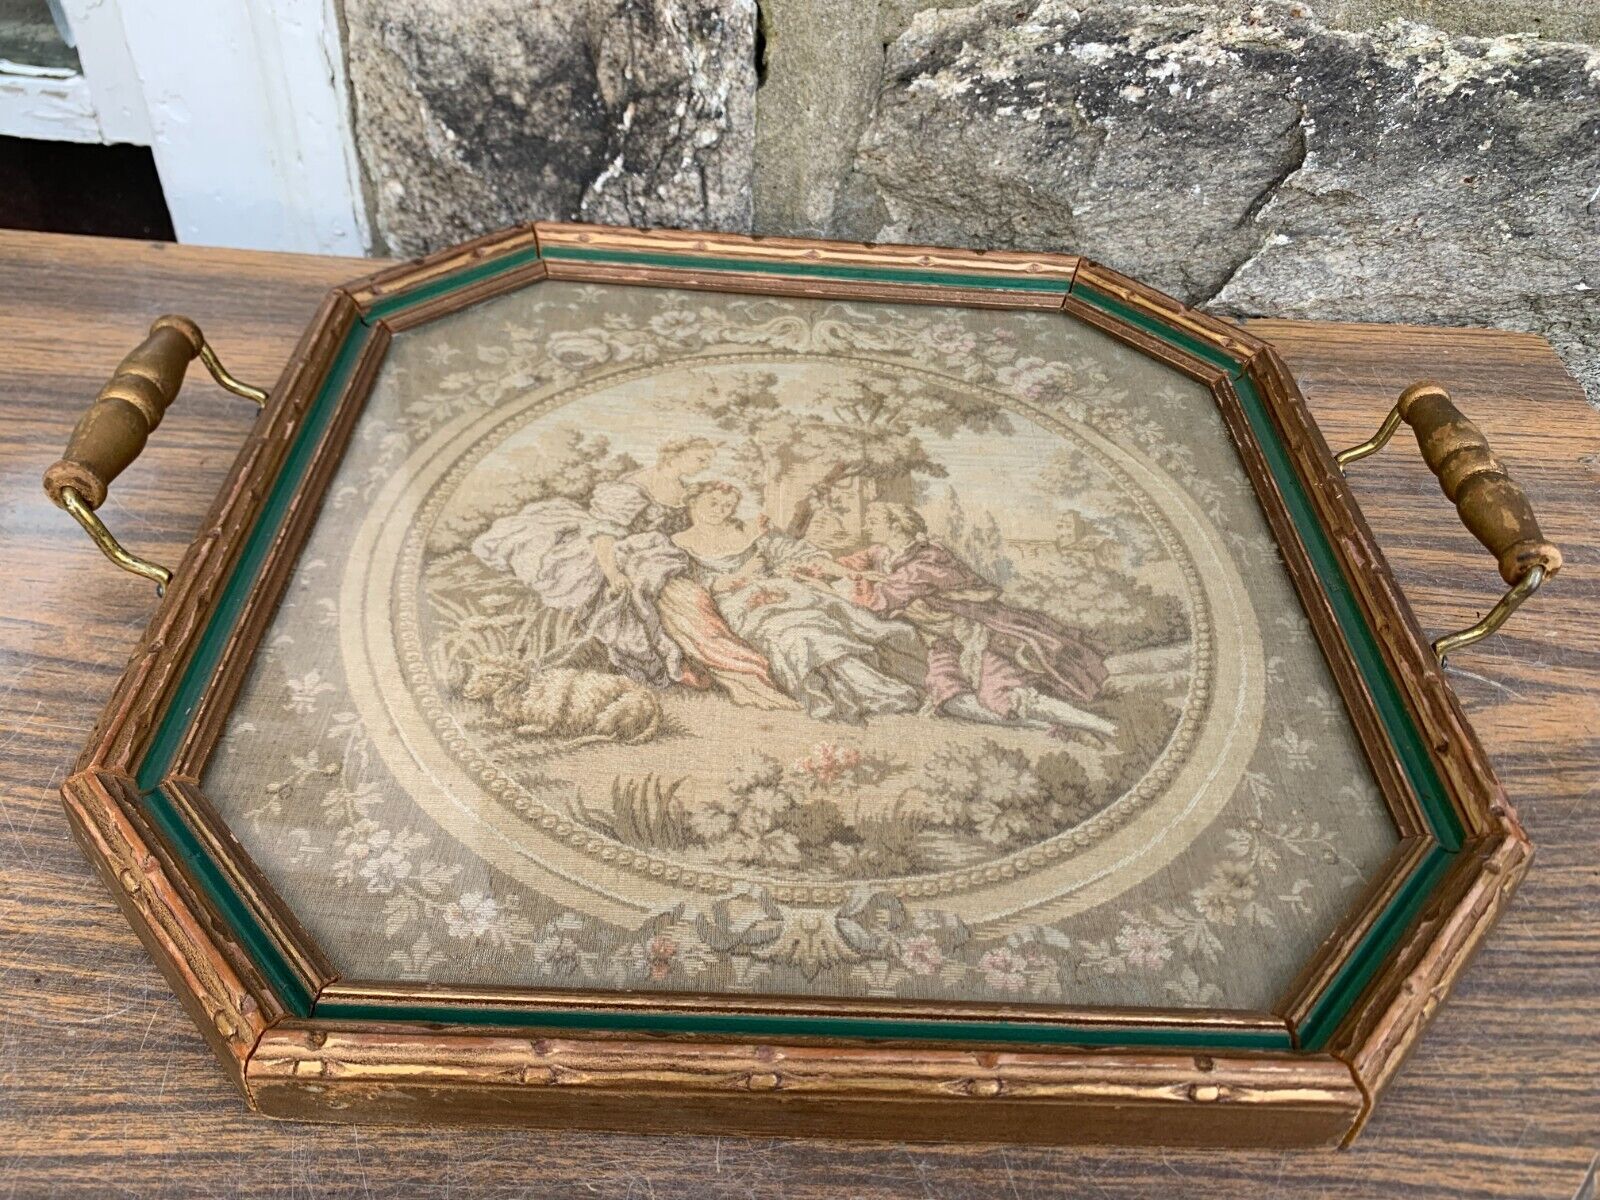 Antique Woven Tapestry Tray Art Victorian Scene French Provincial Gold Frame